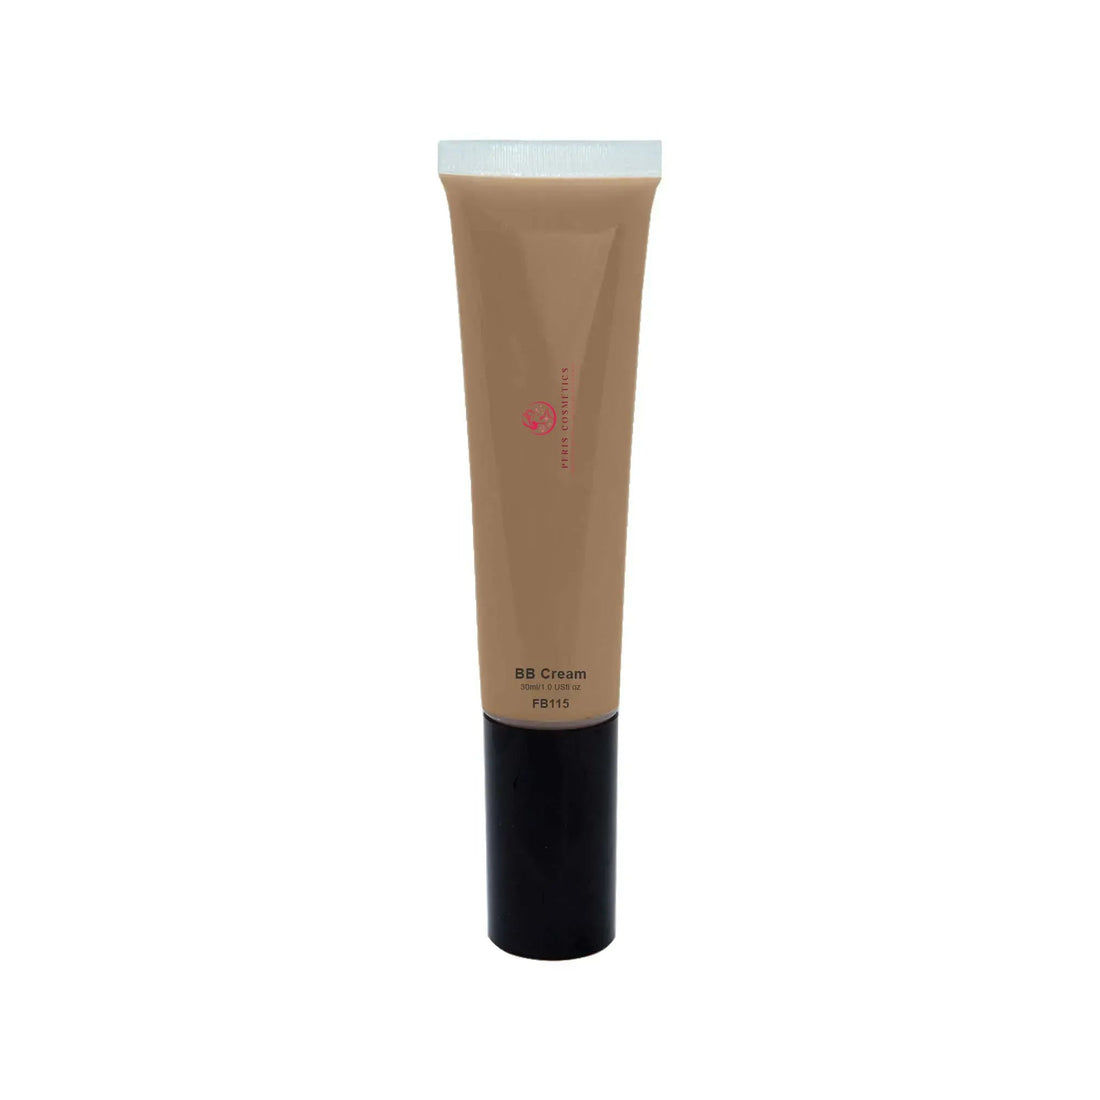 Peris Cosmetics Birch BB Cream with SPF: Hydration, Line Smoothing, and Sun Protection Kylie Cosmetics Amazon